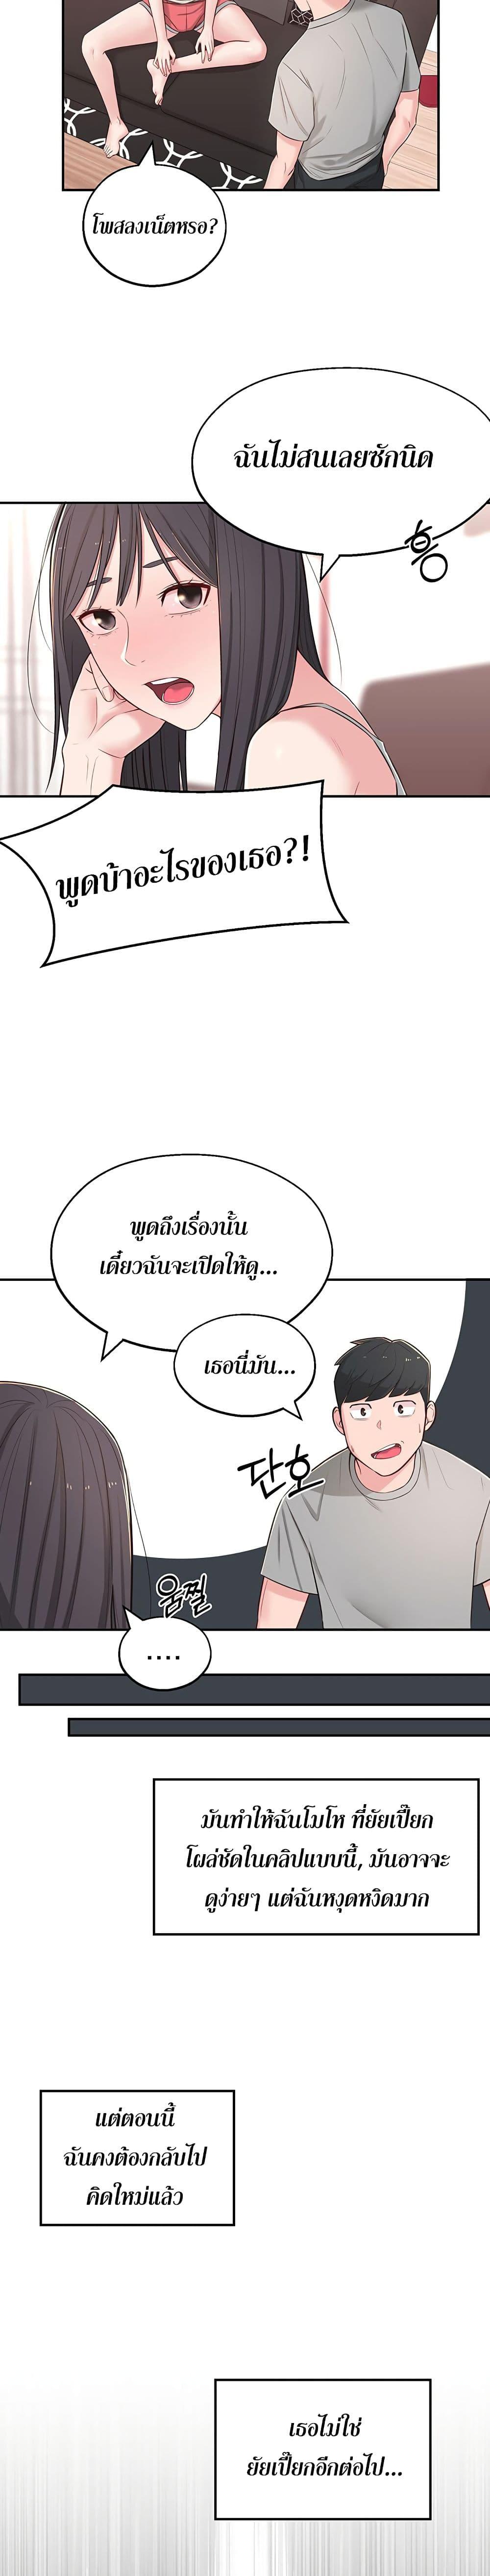 A Knowing Sister 5 ภาพ 26